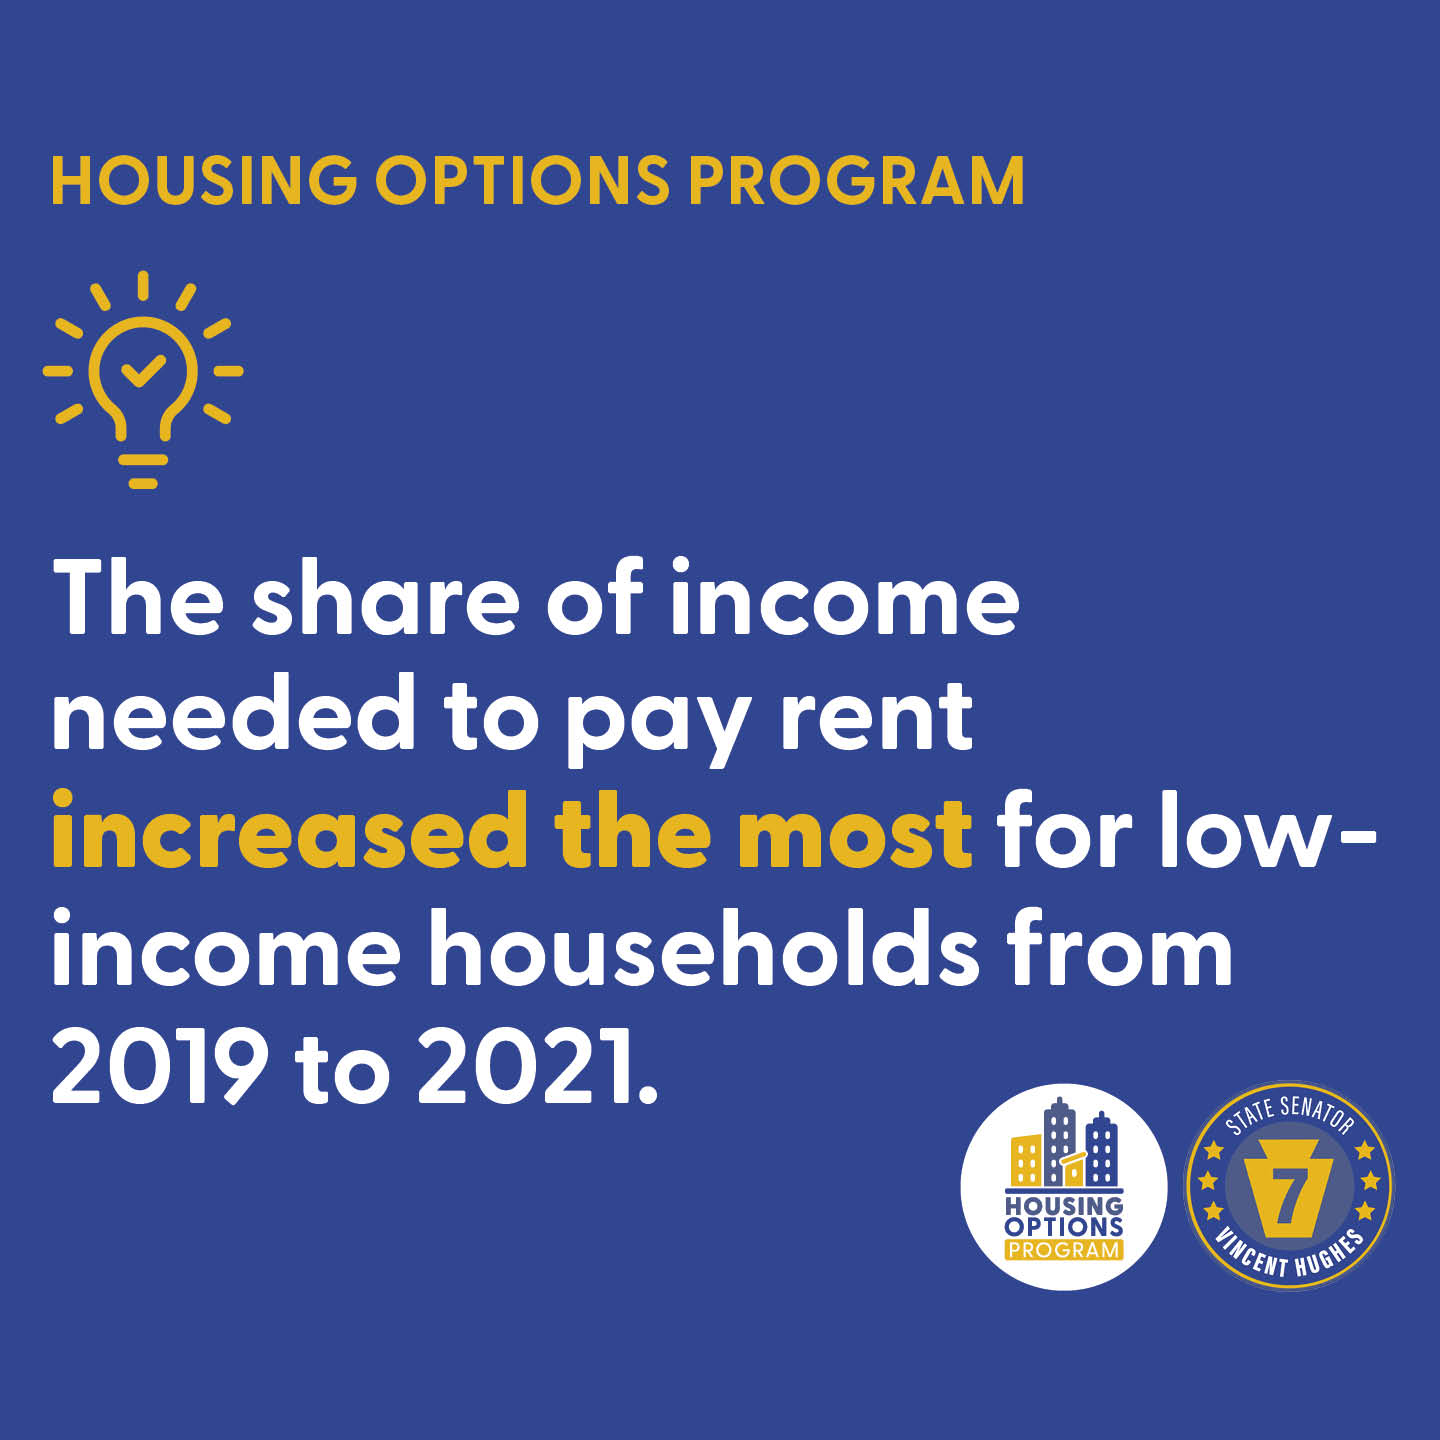 HOUSING OPTIONS PROGRAM - The share of income needed to pay rent increased the most for low-income households from 2019 to 2021.